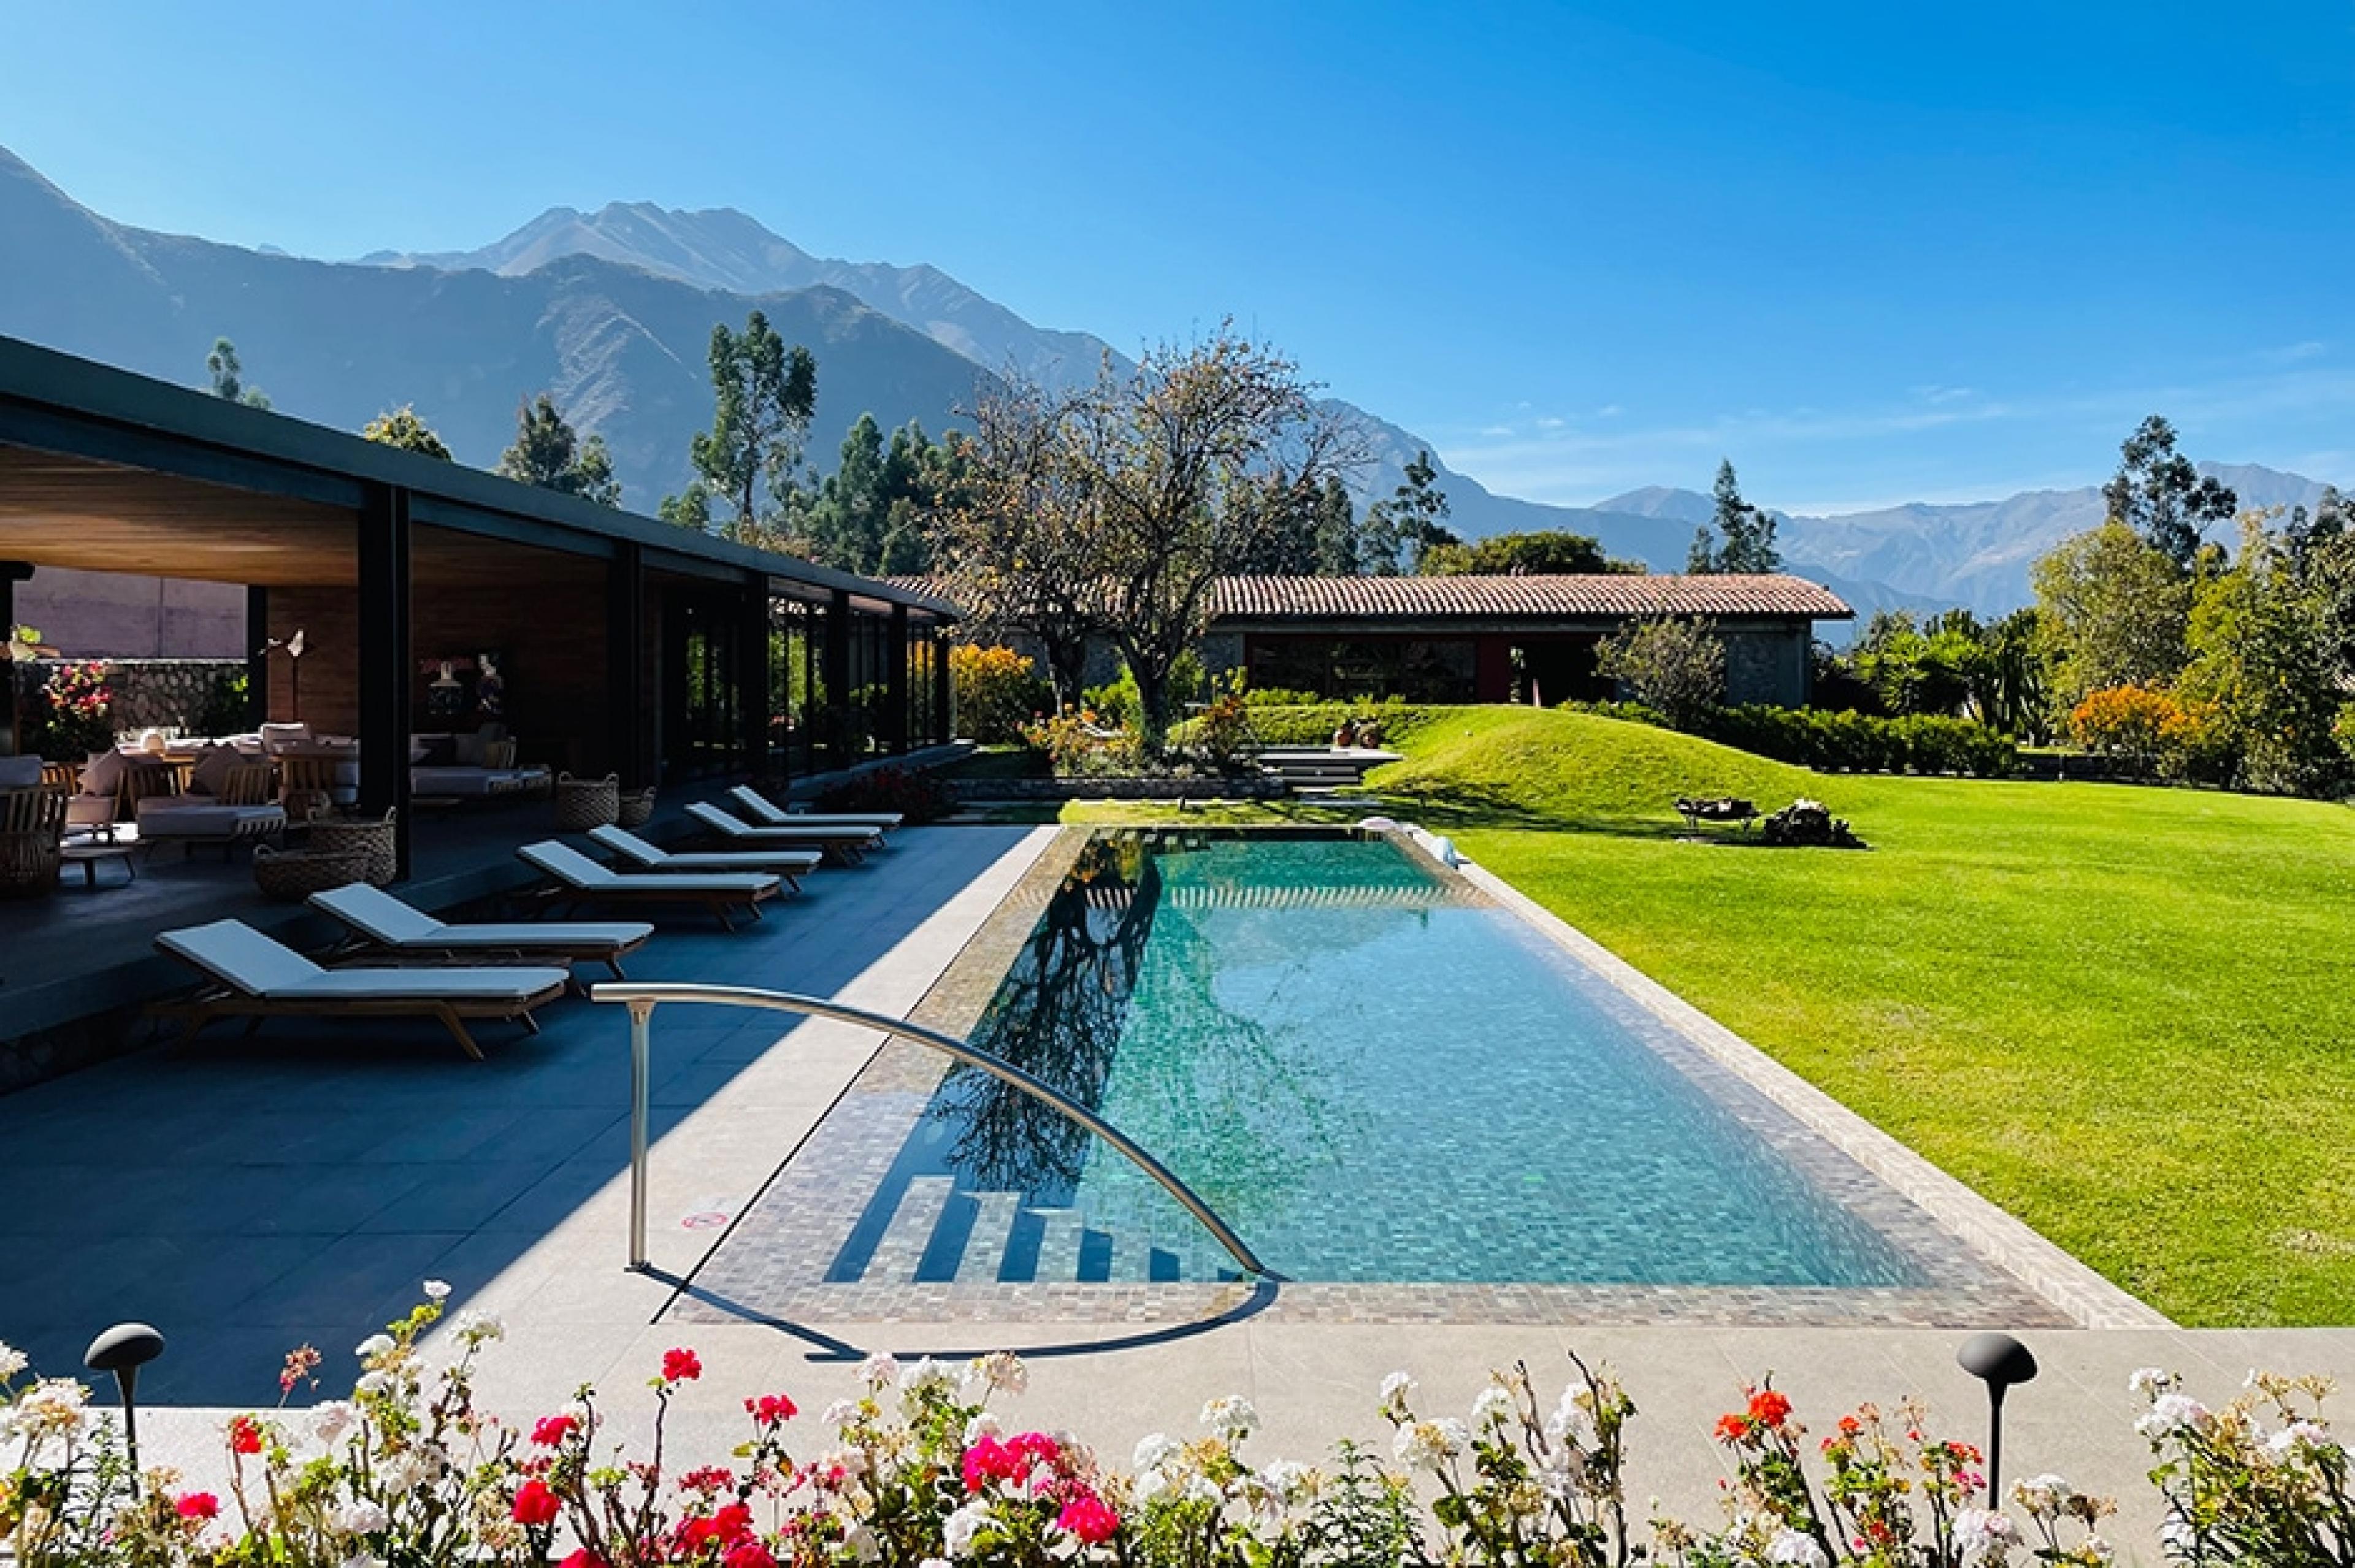 outdoor pool at hotel at foothills of Andes mountains